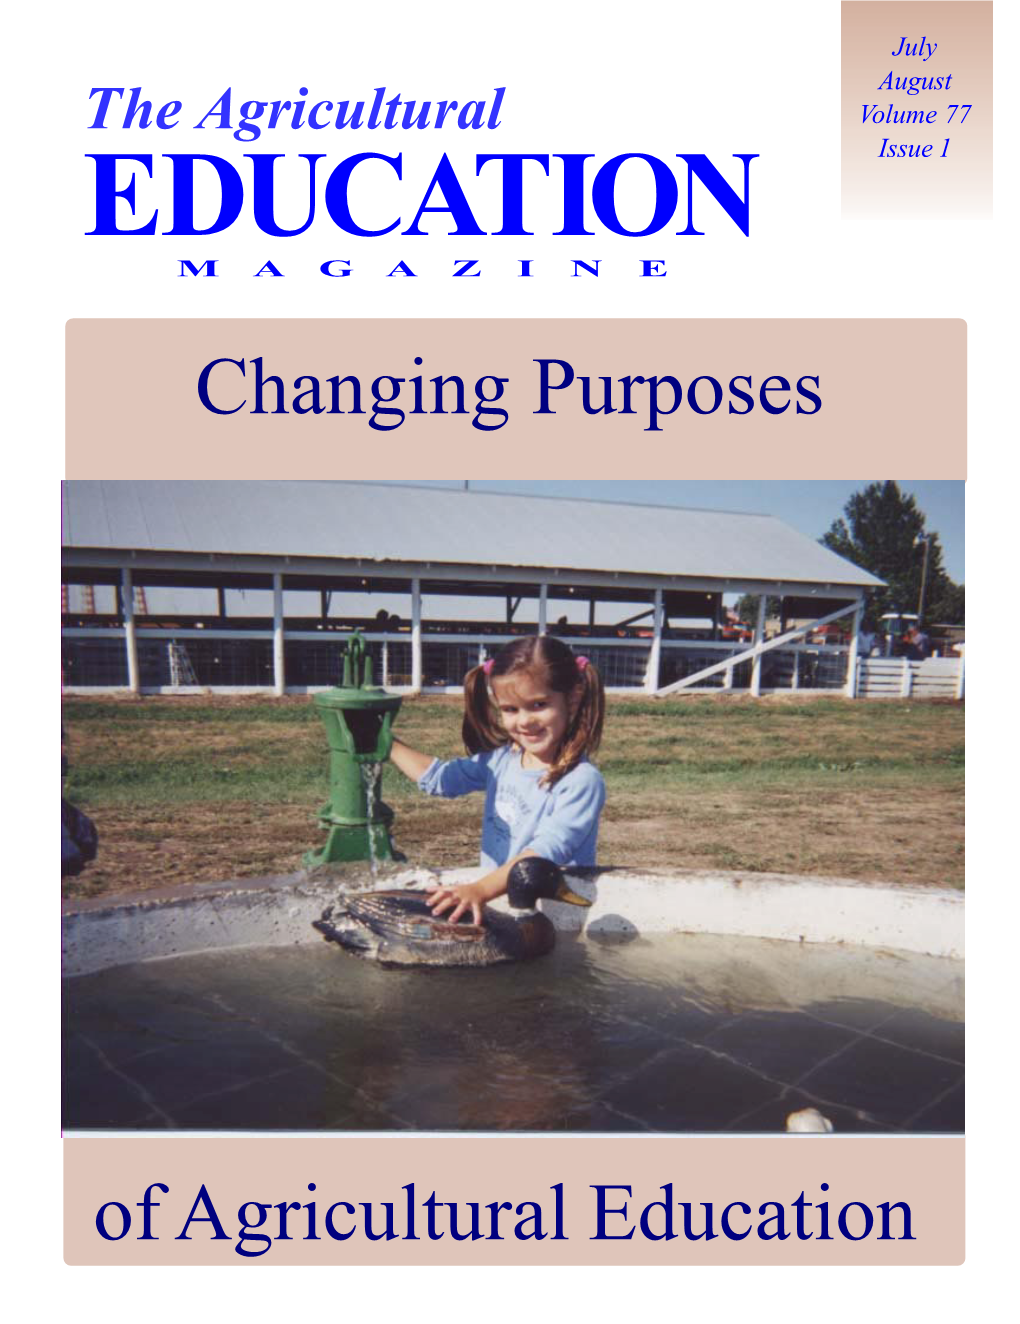 Changing Purposes of Agricultural Education